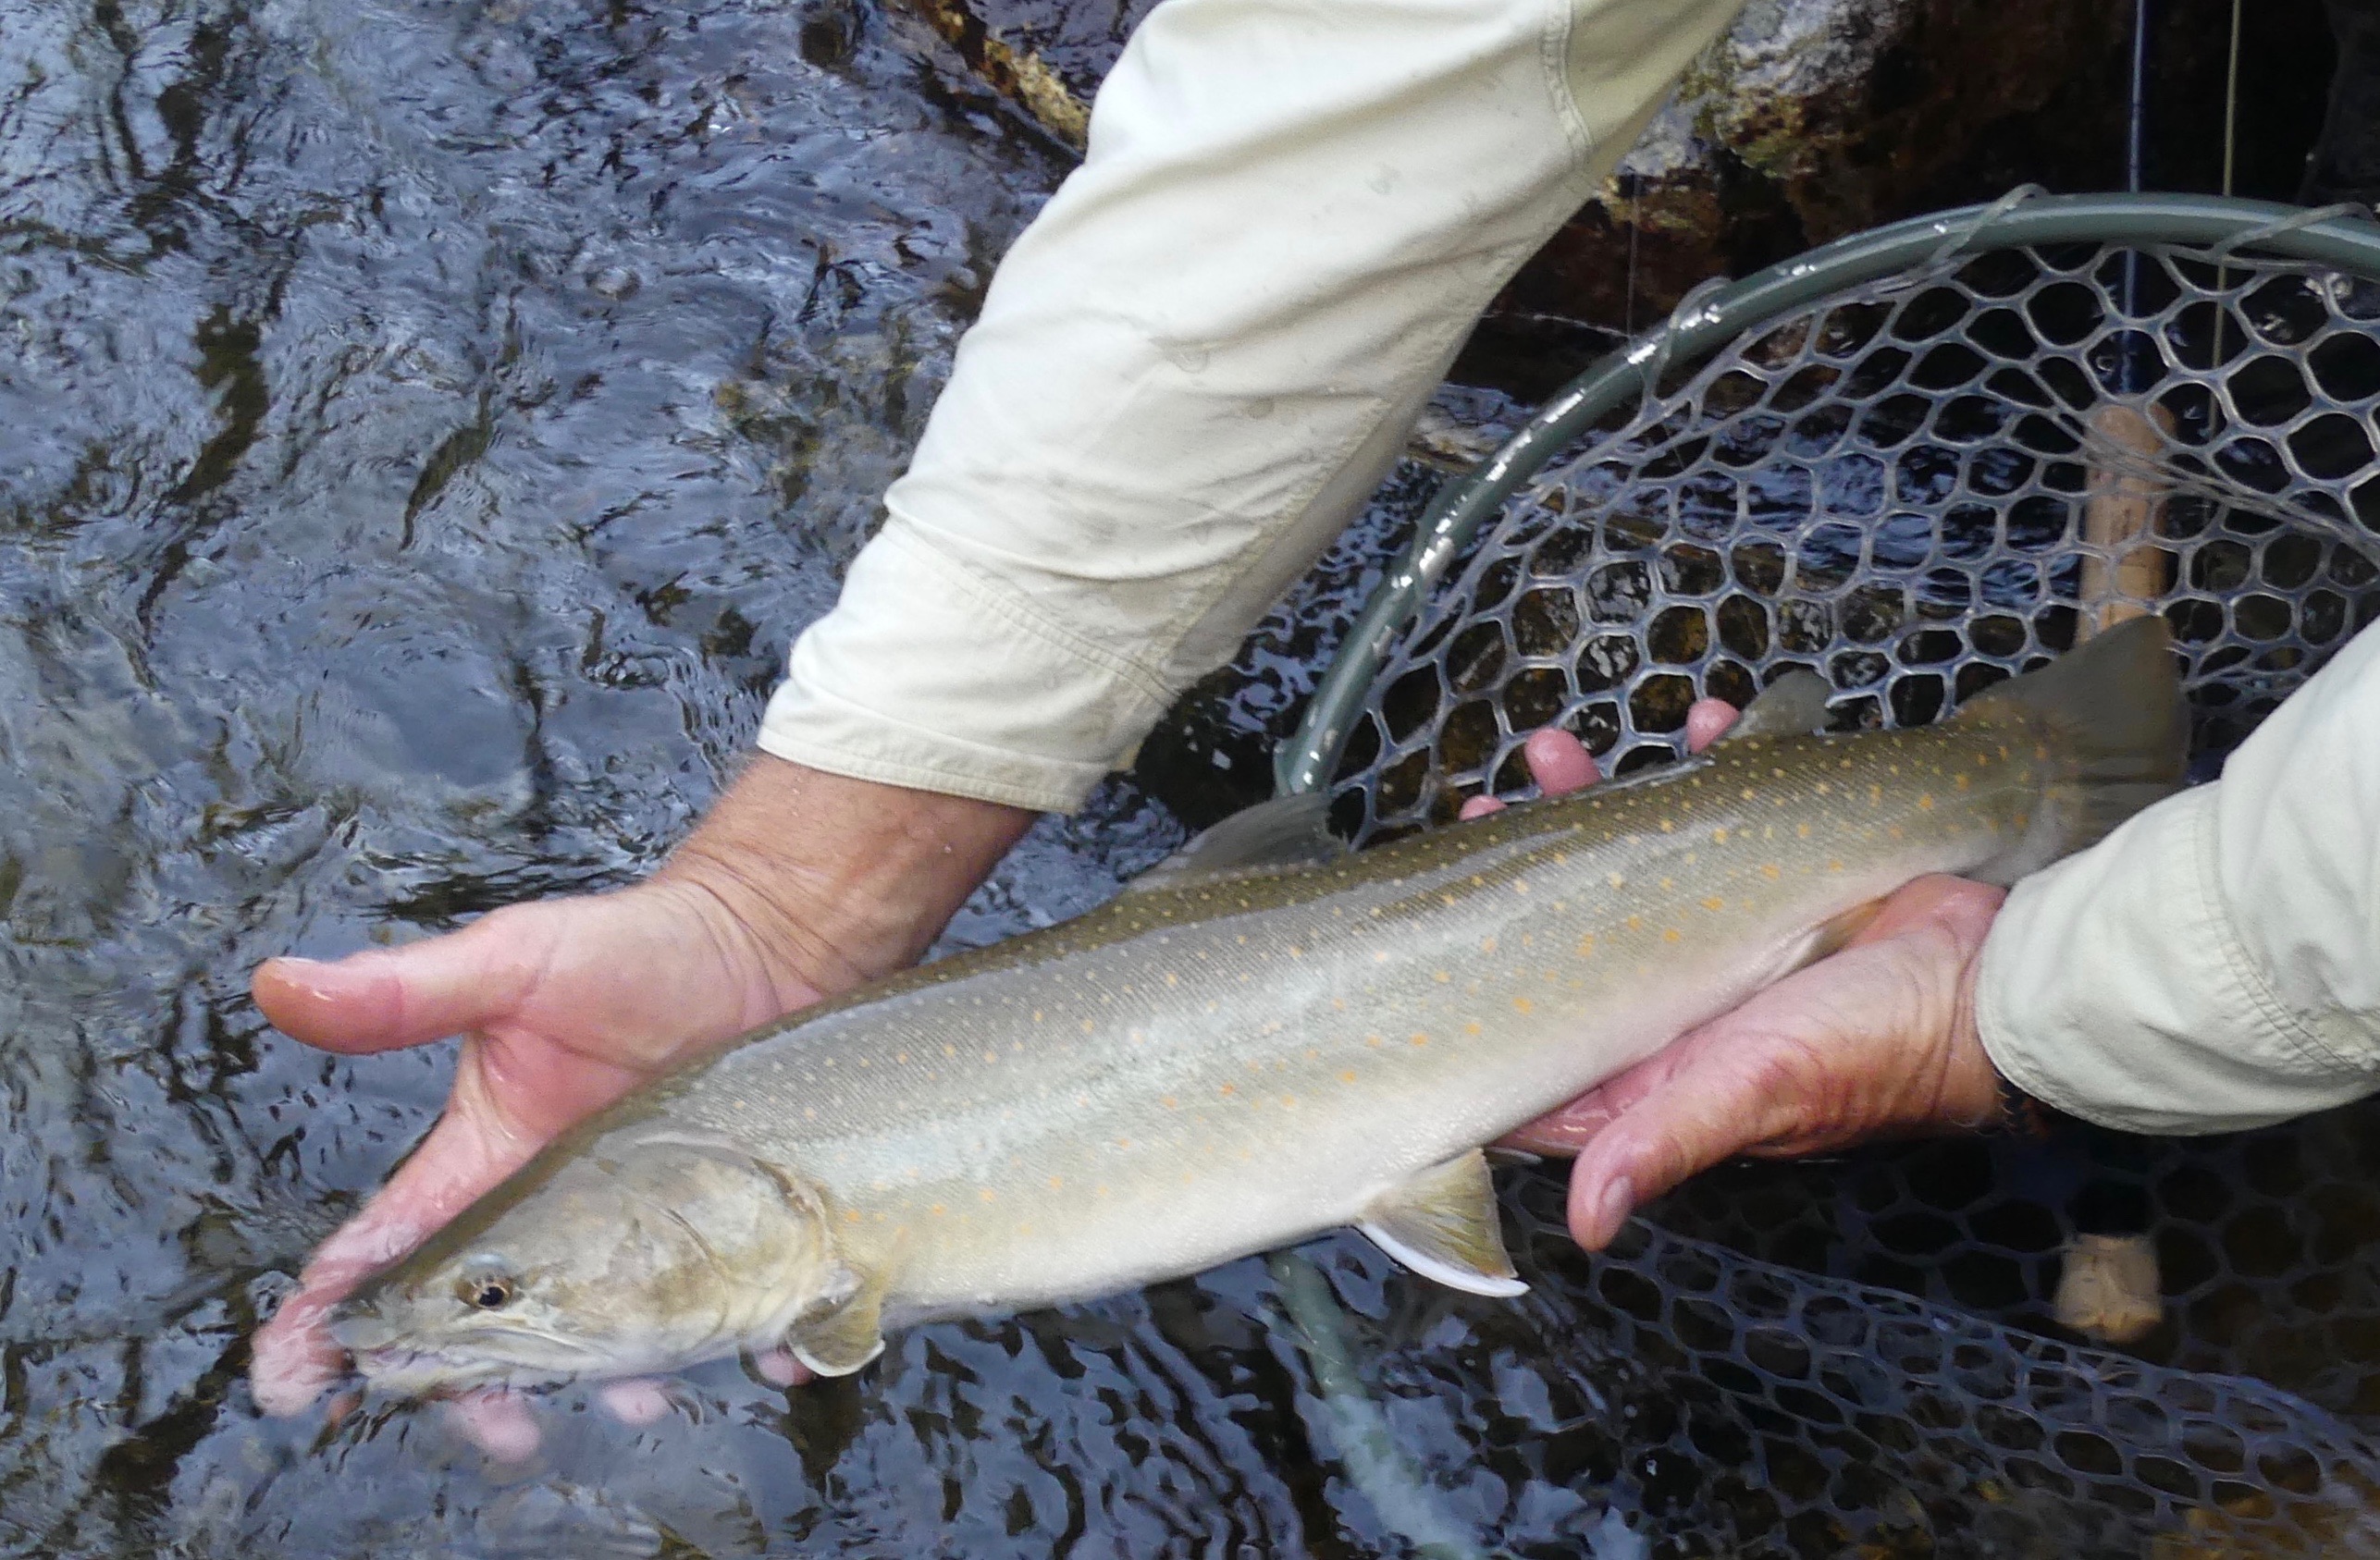 Casting for the bulls: fishing for Idaho's bull trout